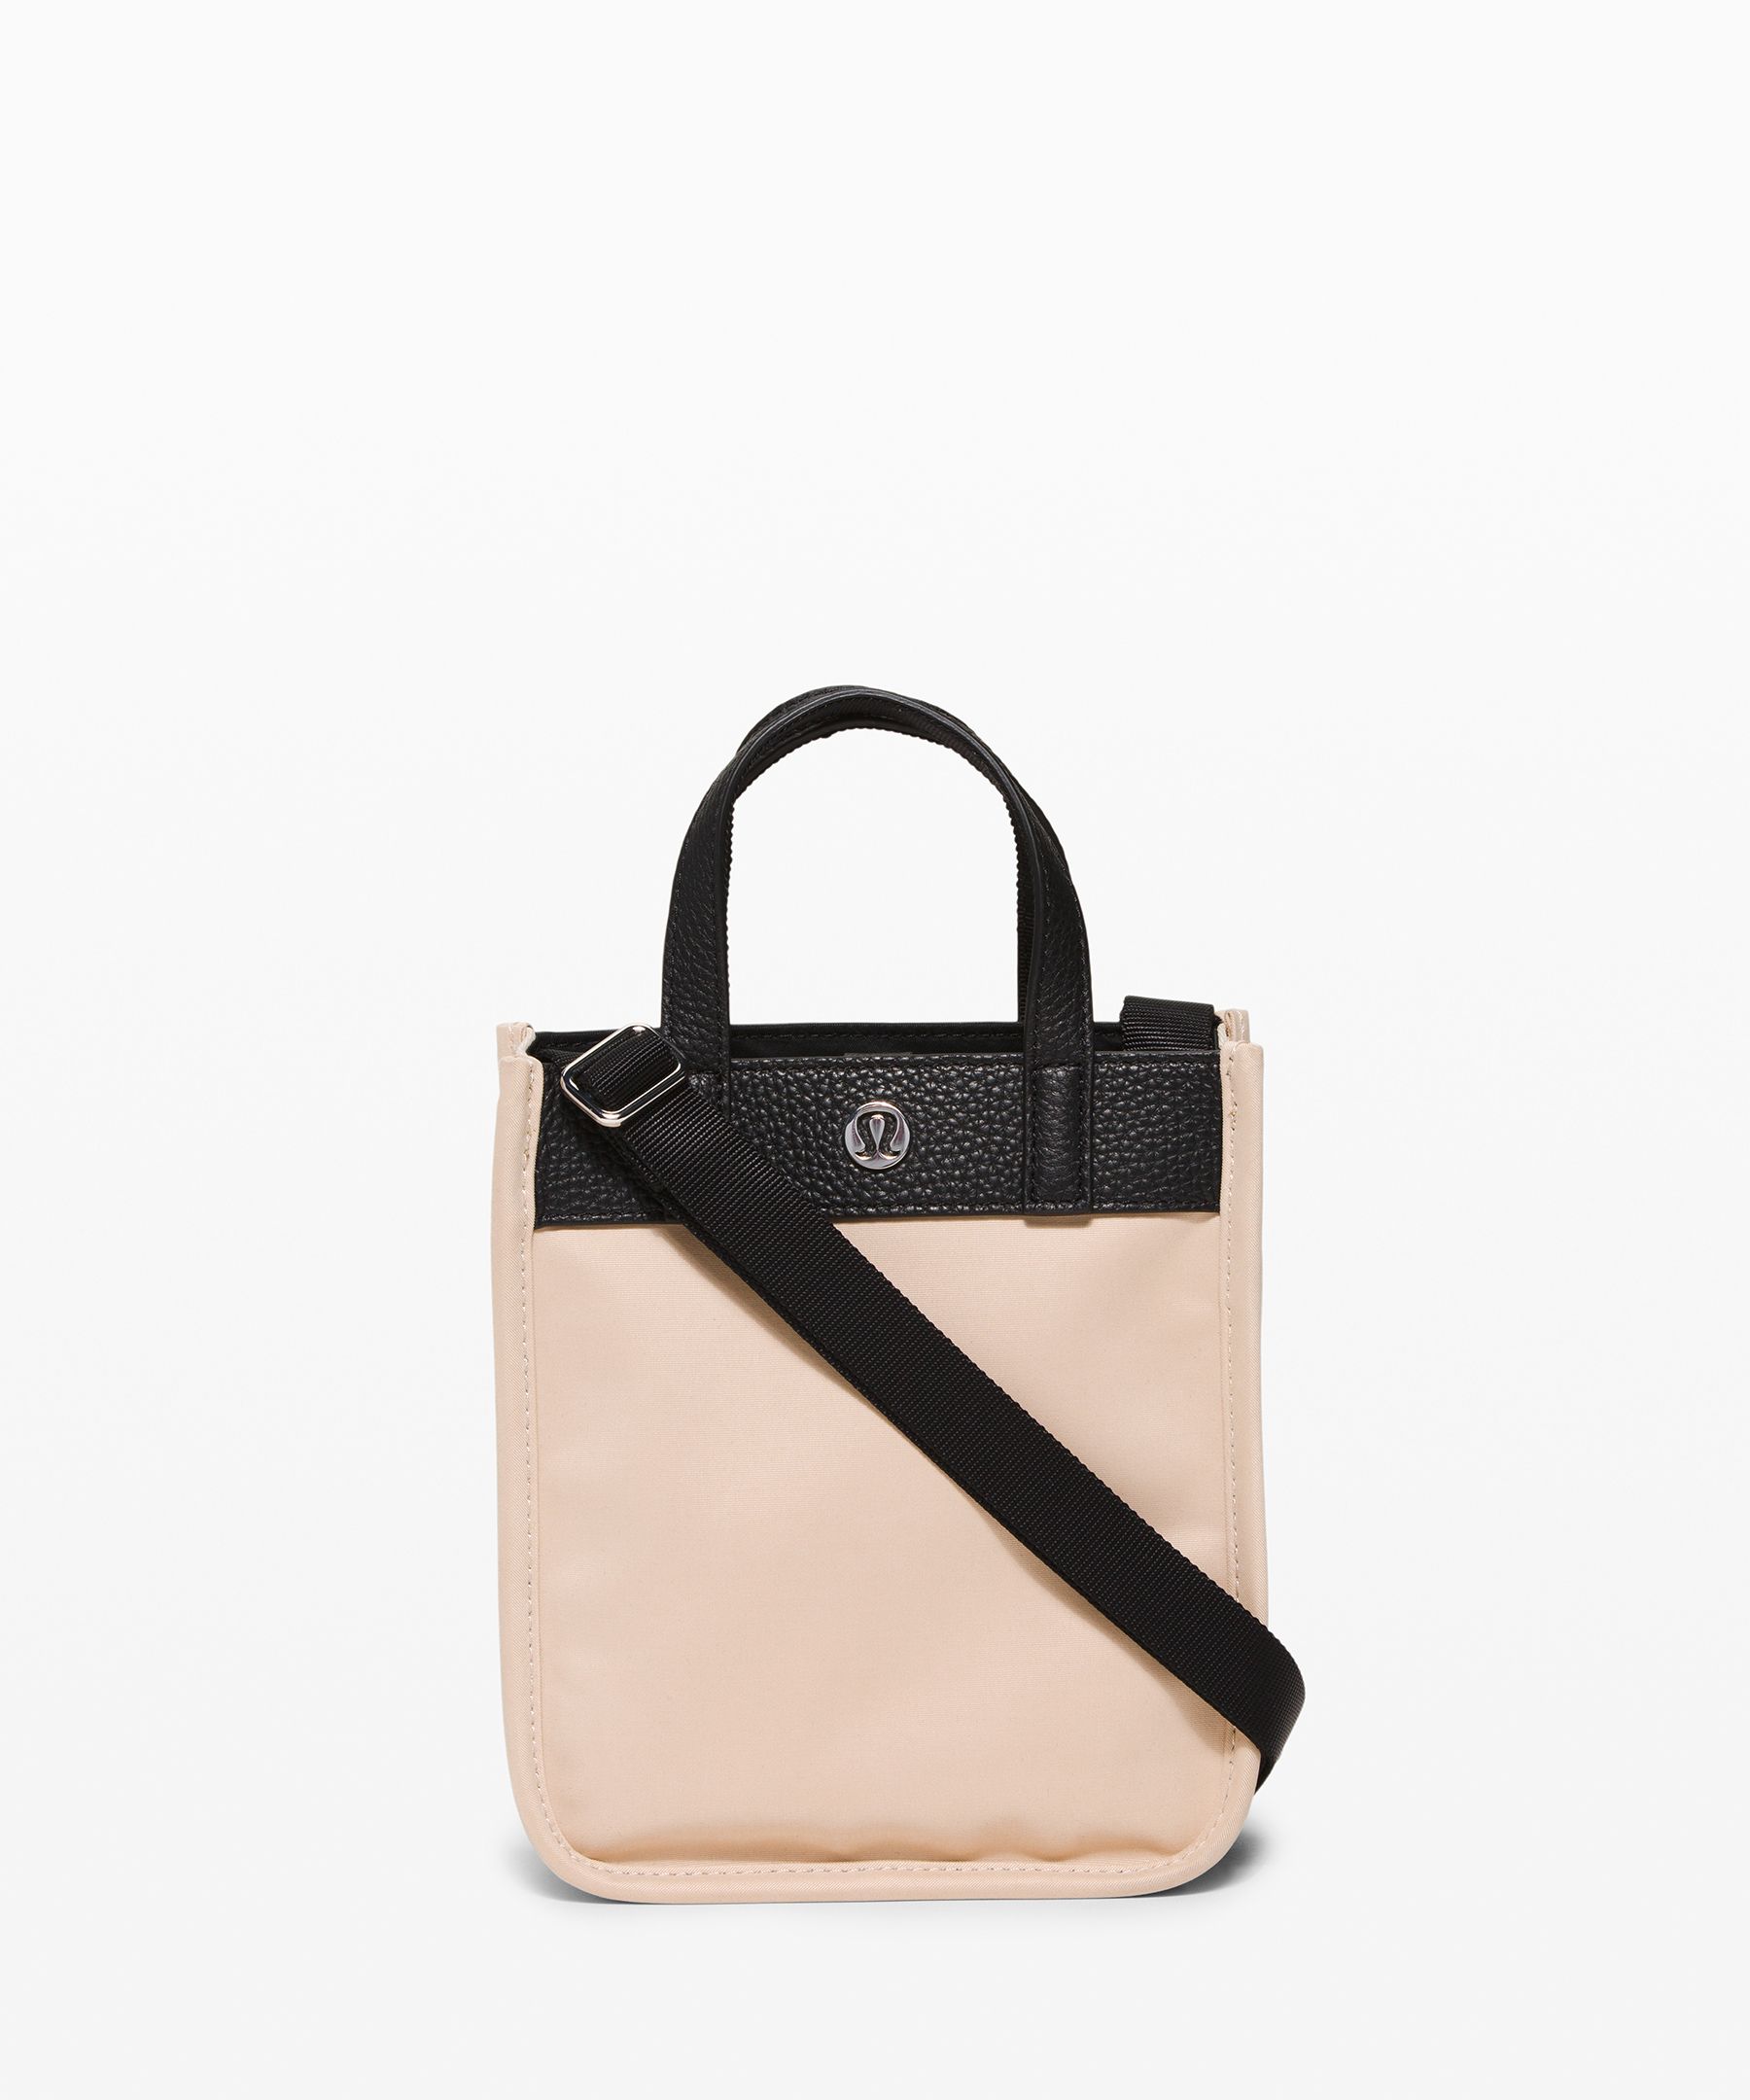 lululemon now and always tote